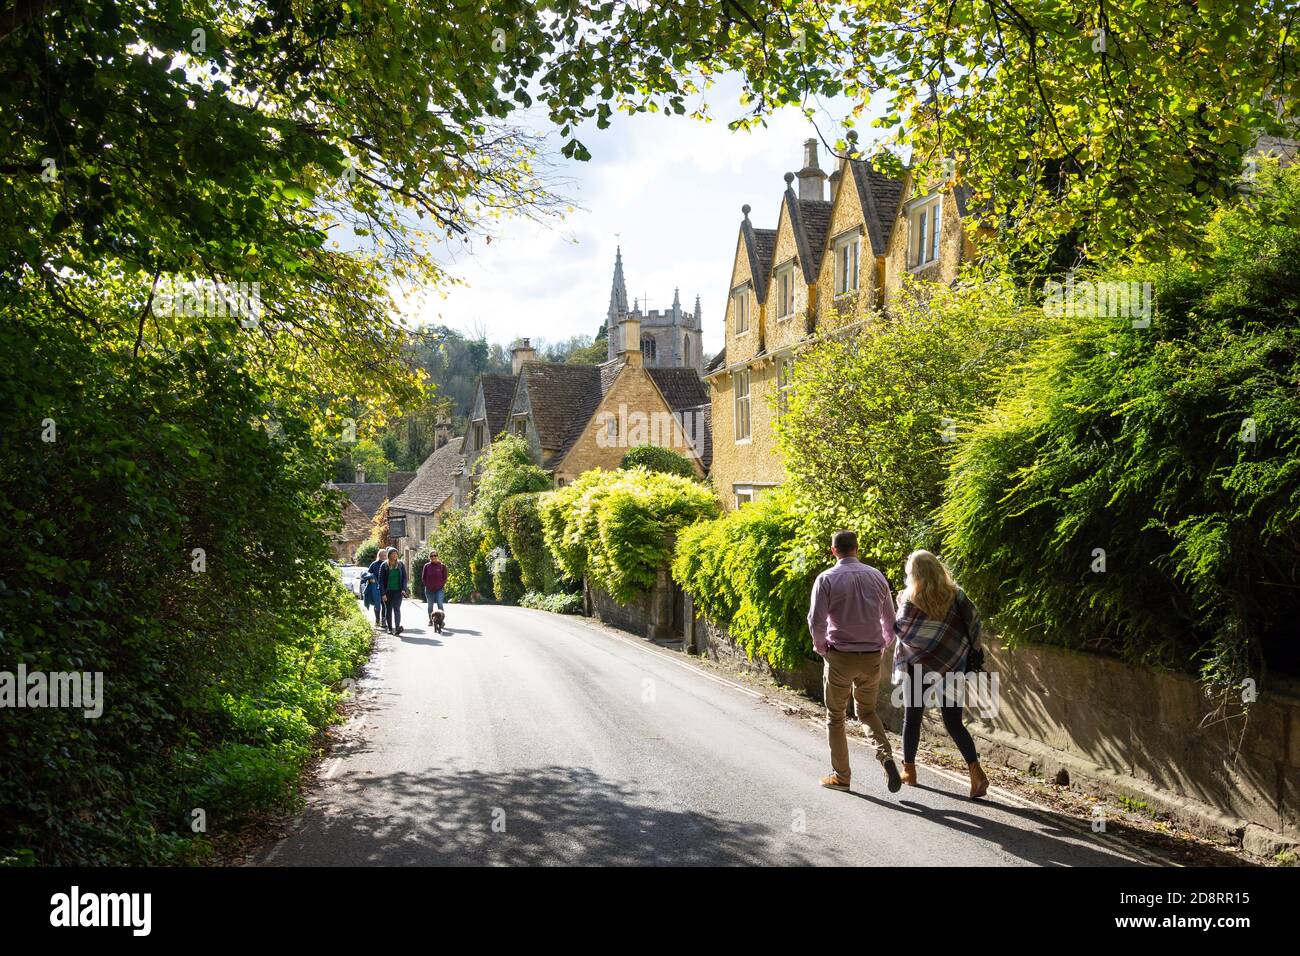 View of village, The St, Castle Combe, Wiltshire, England, United Kingdom Stock Photo